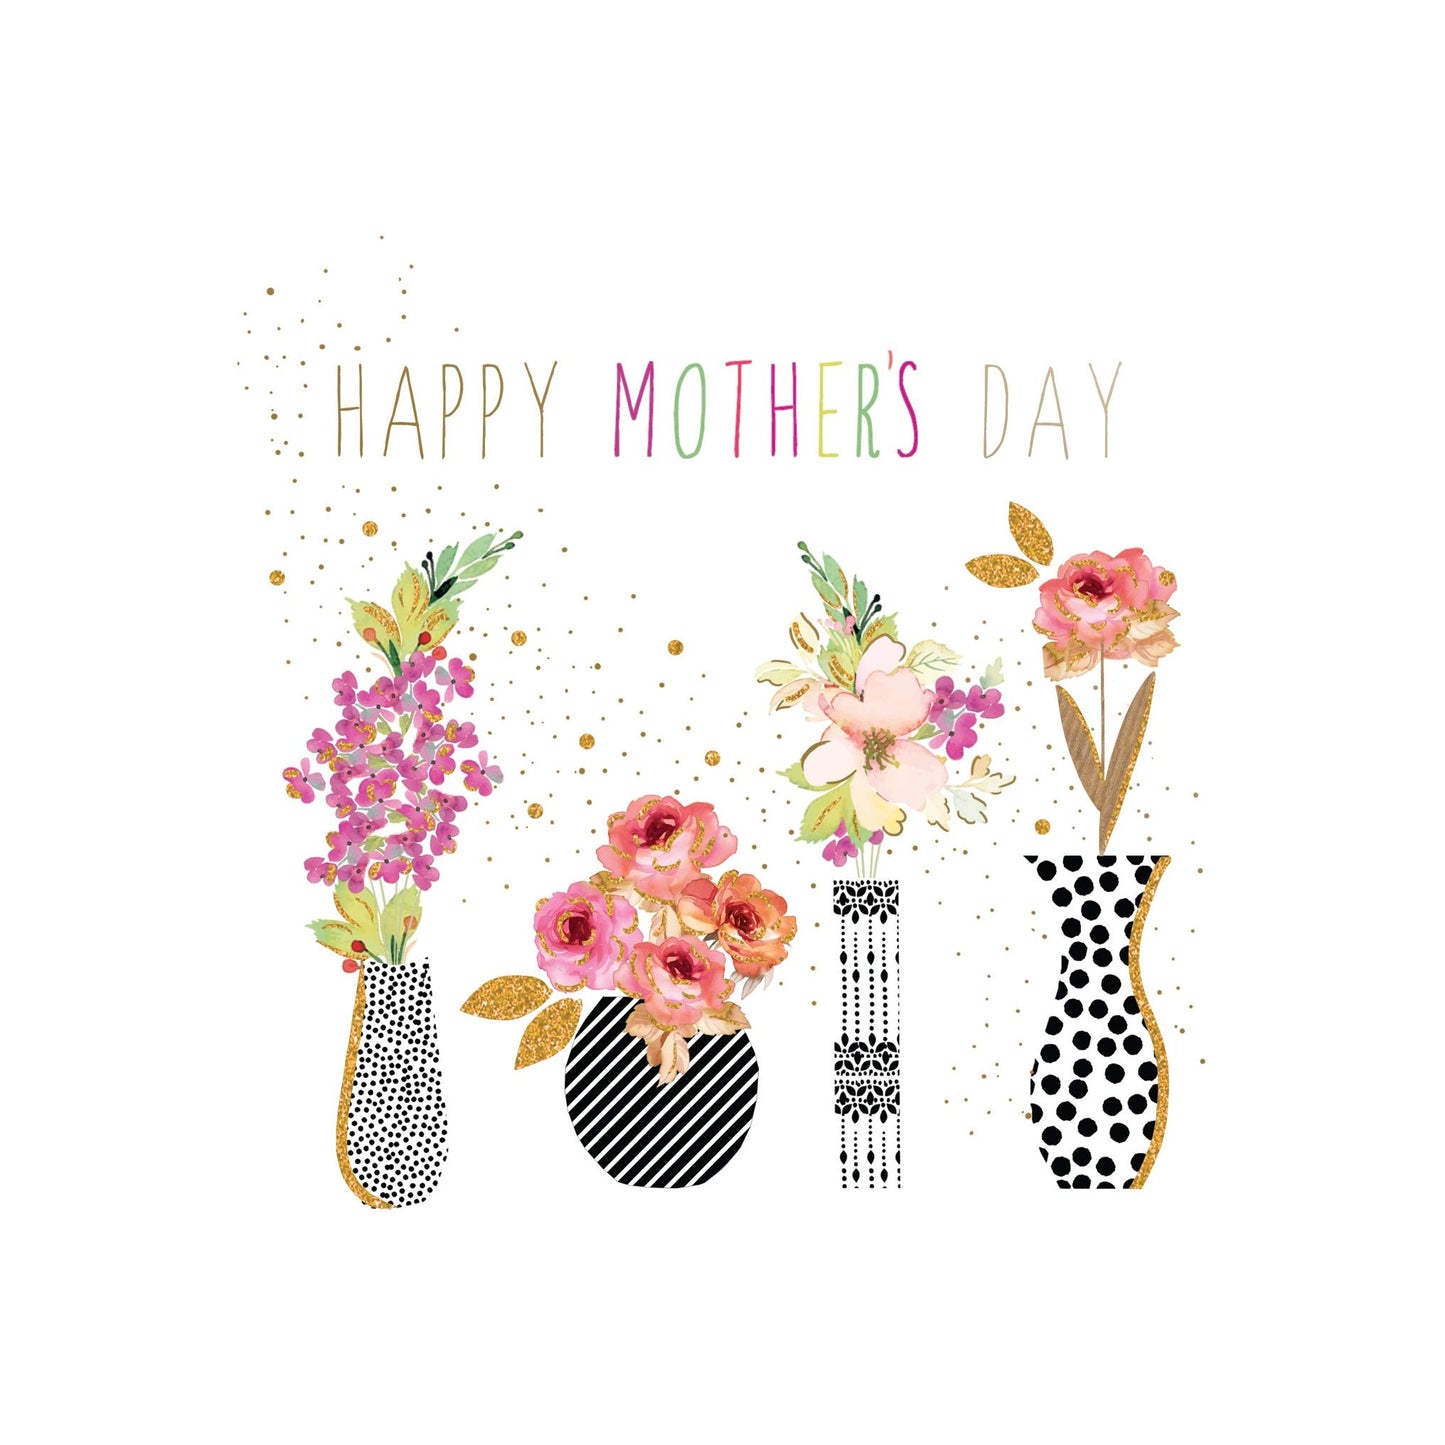 Flower Vases Mother's Day Card From Us Sara Miller